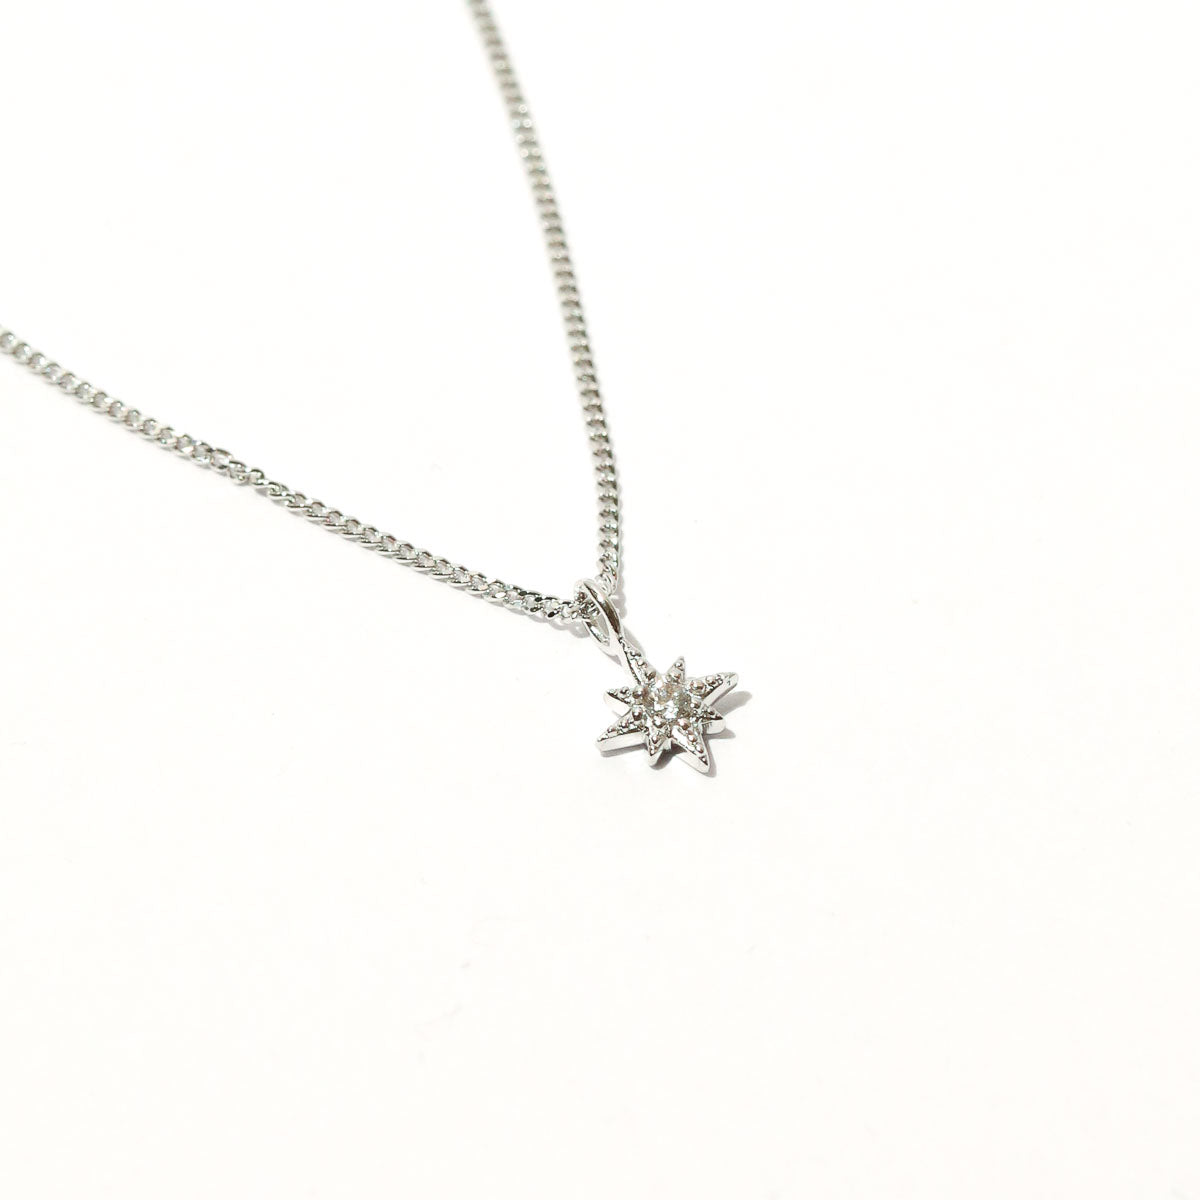 Twilight Star Pendant Necklace in Silver close up